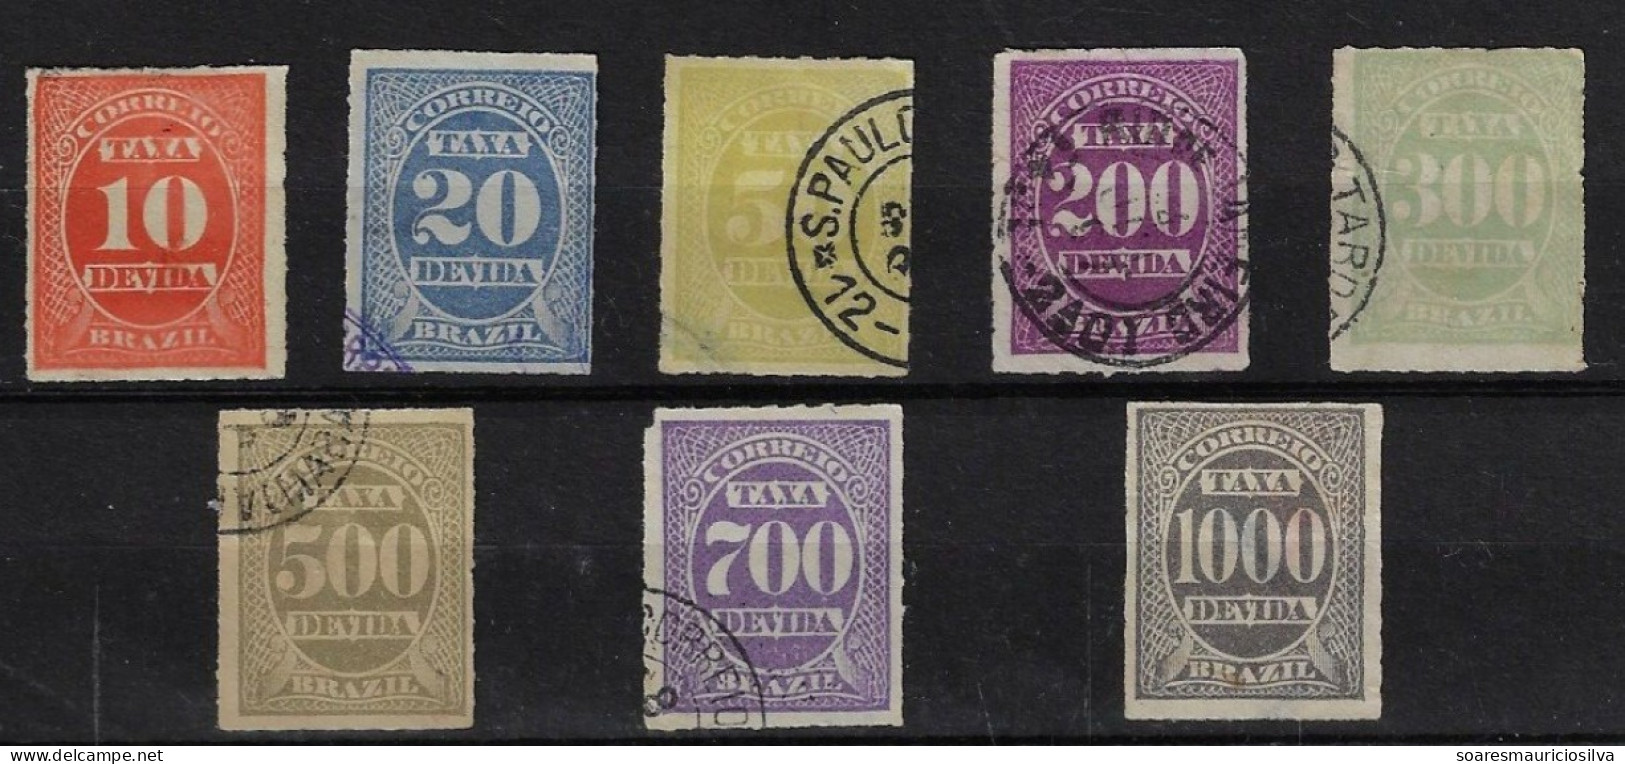 Brazil 1890 Complete Series Postage Due American Bank Note Colors Used & Unused Ink Used In These Stamps Fades In Water - Postage Due